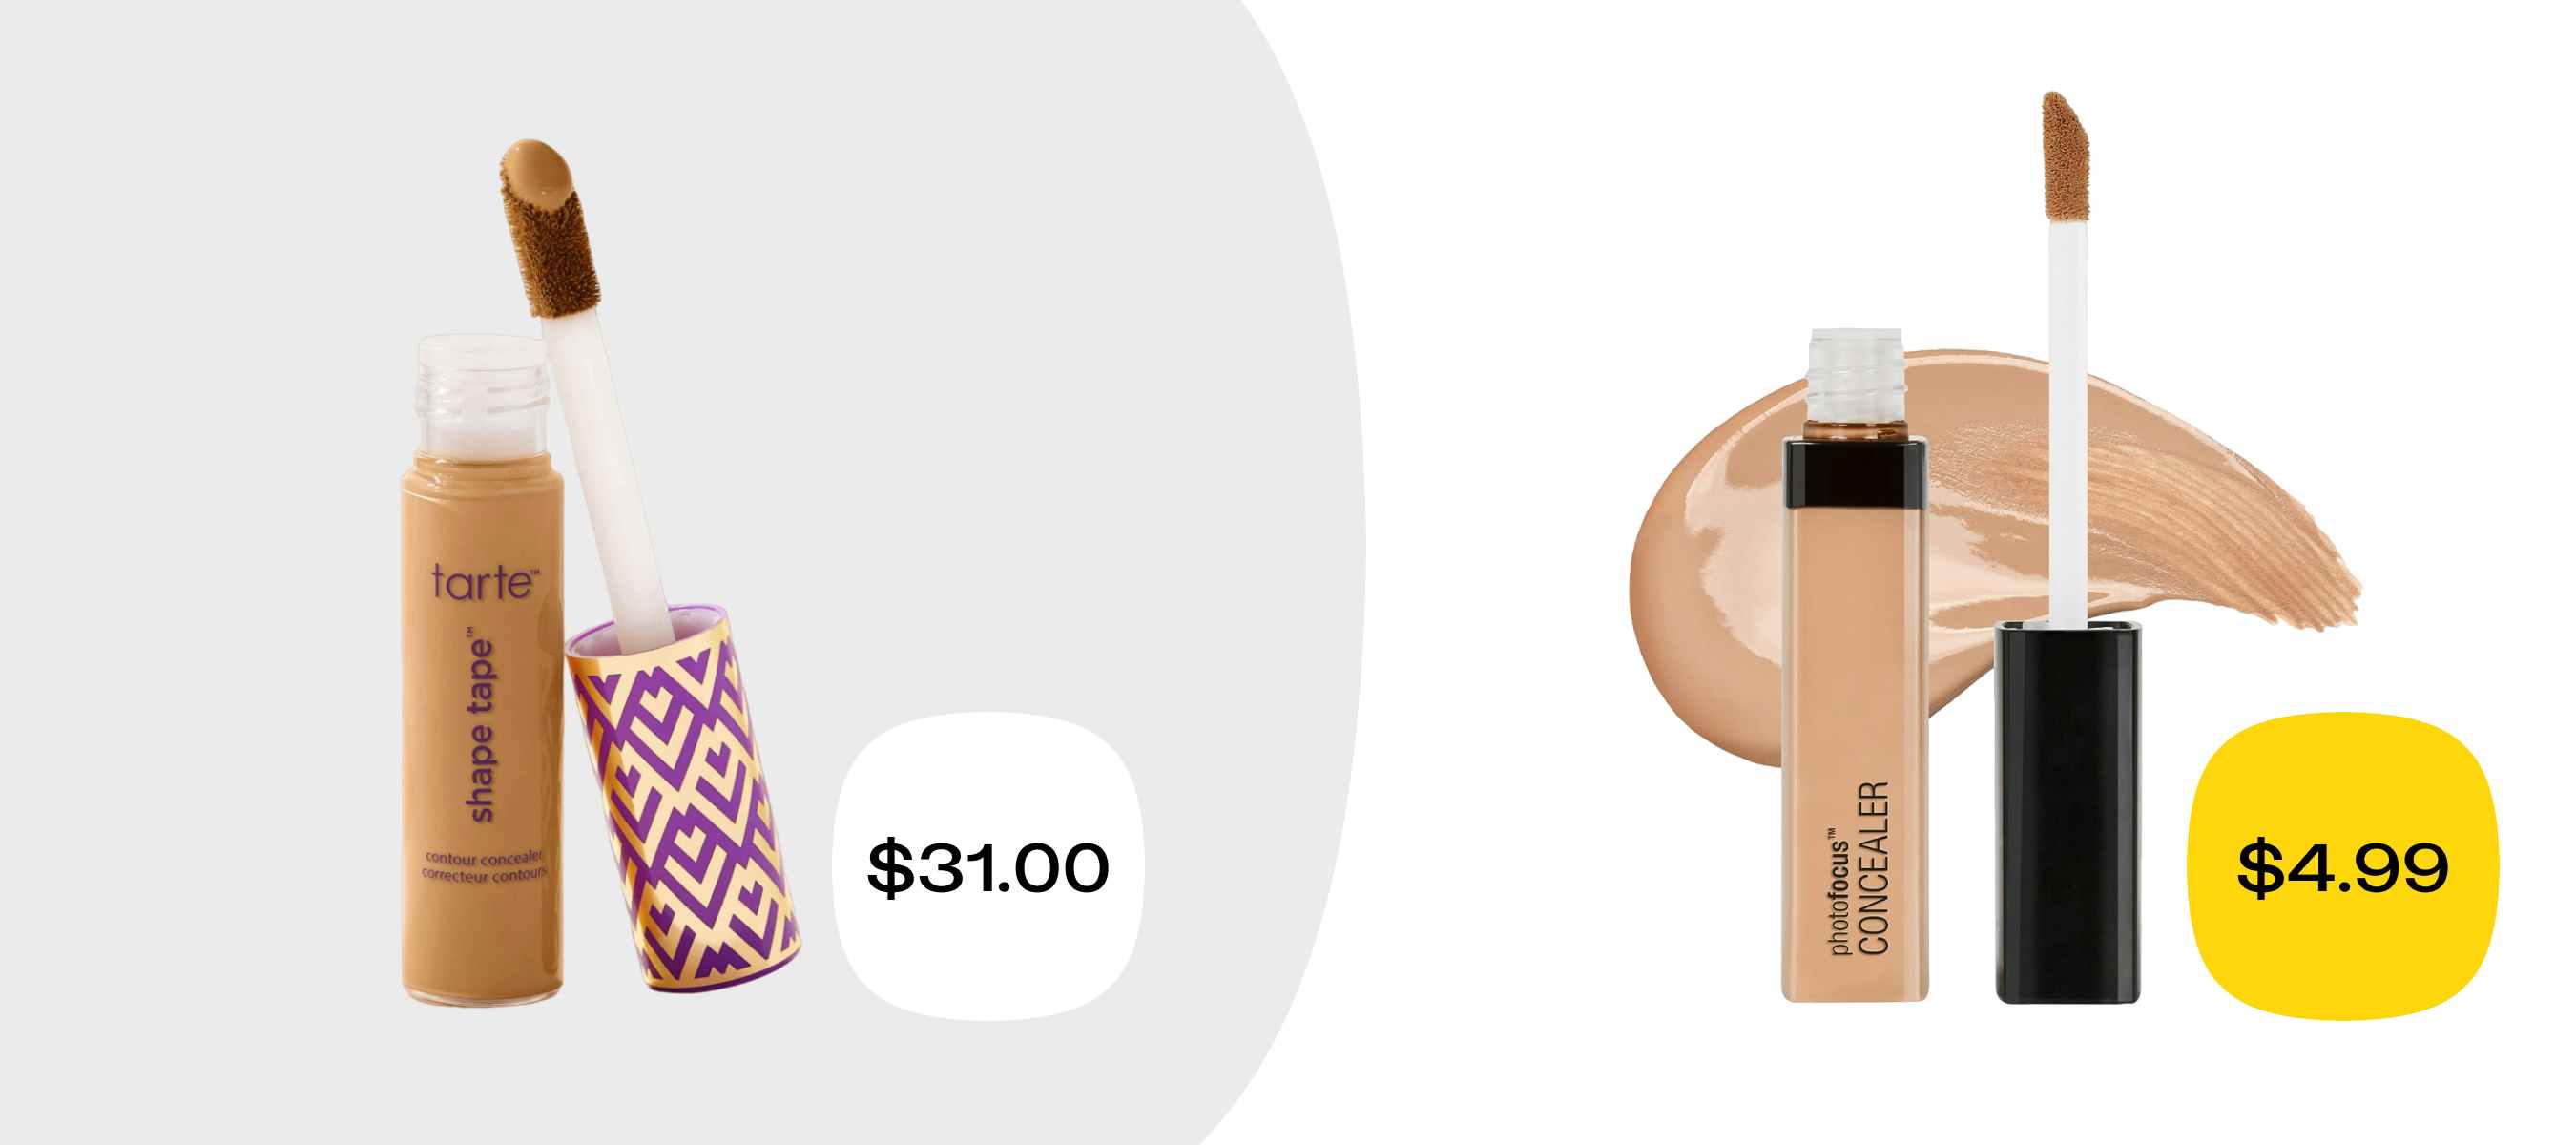 tarte shape tape and wet n wild photo finish concealer price comparison